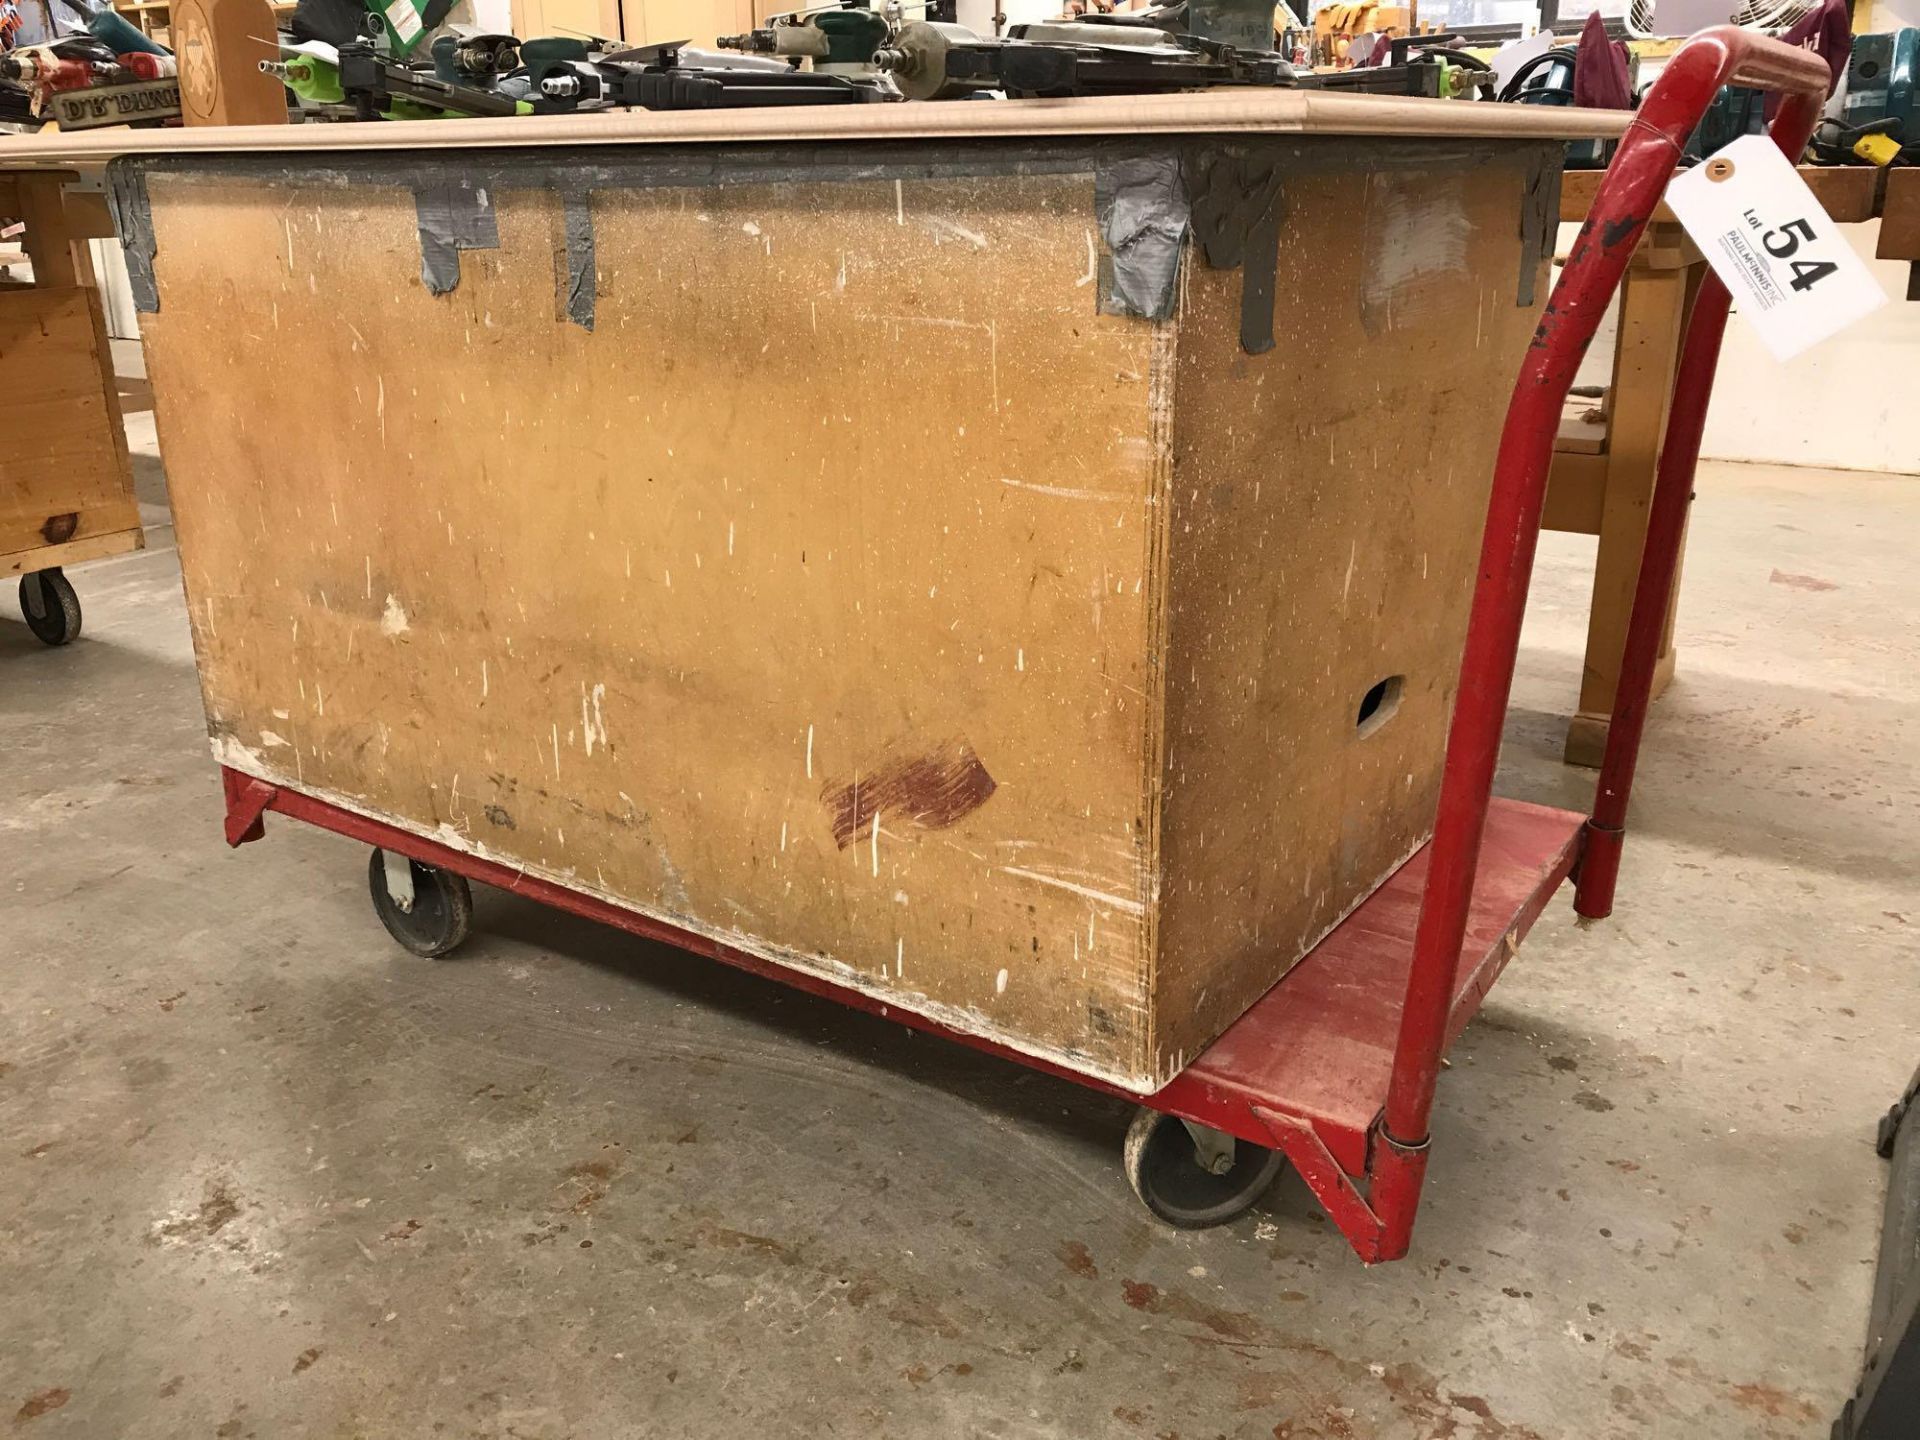 Red rolling metal cart and box